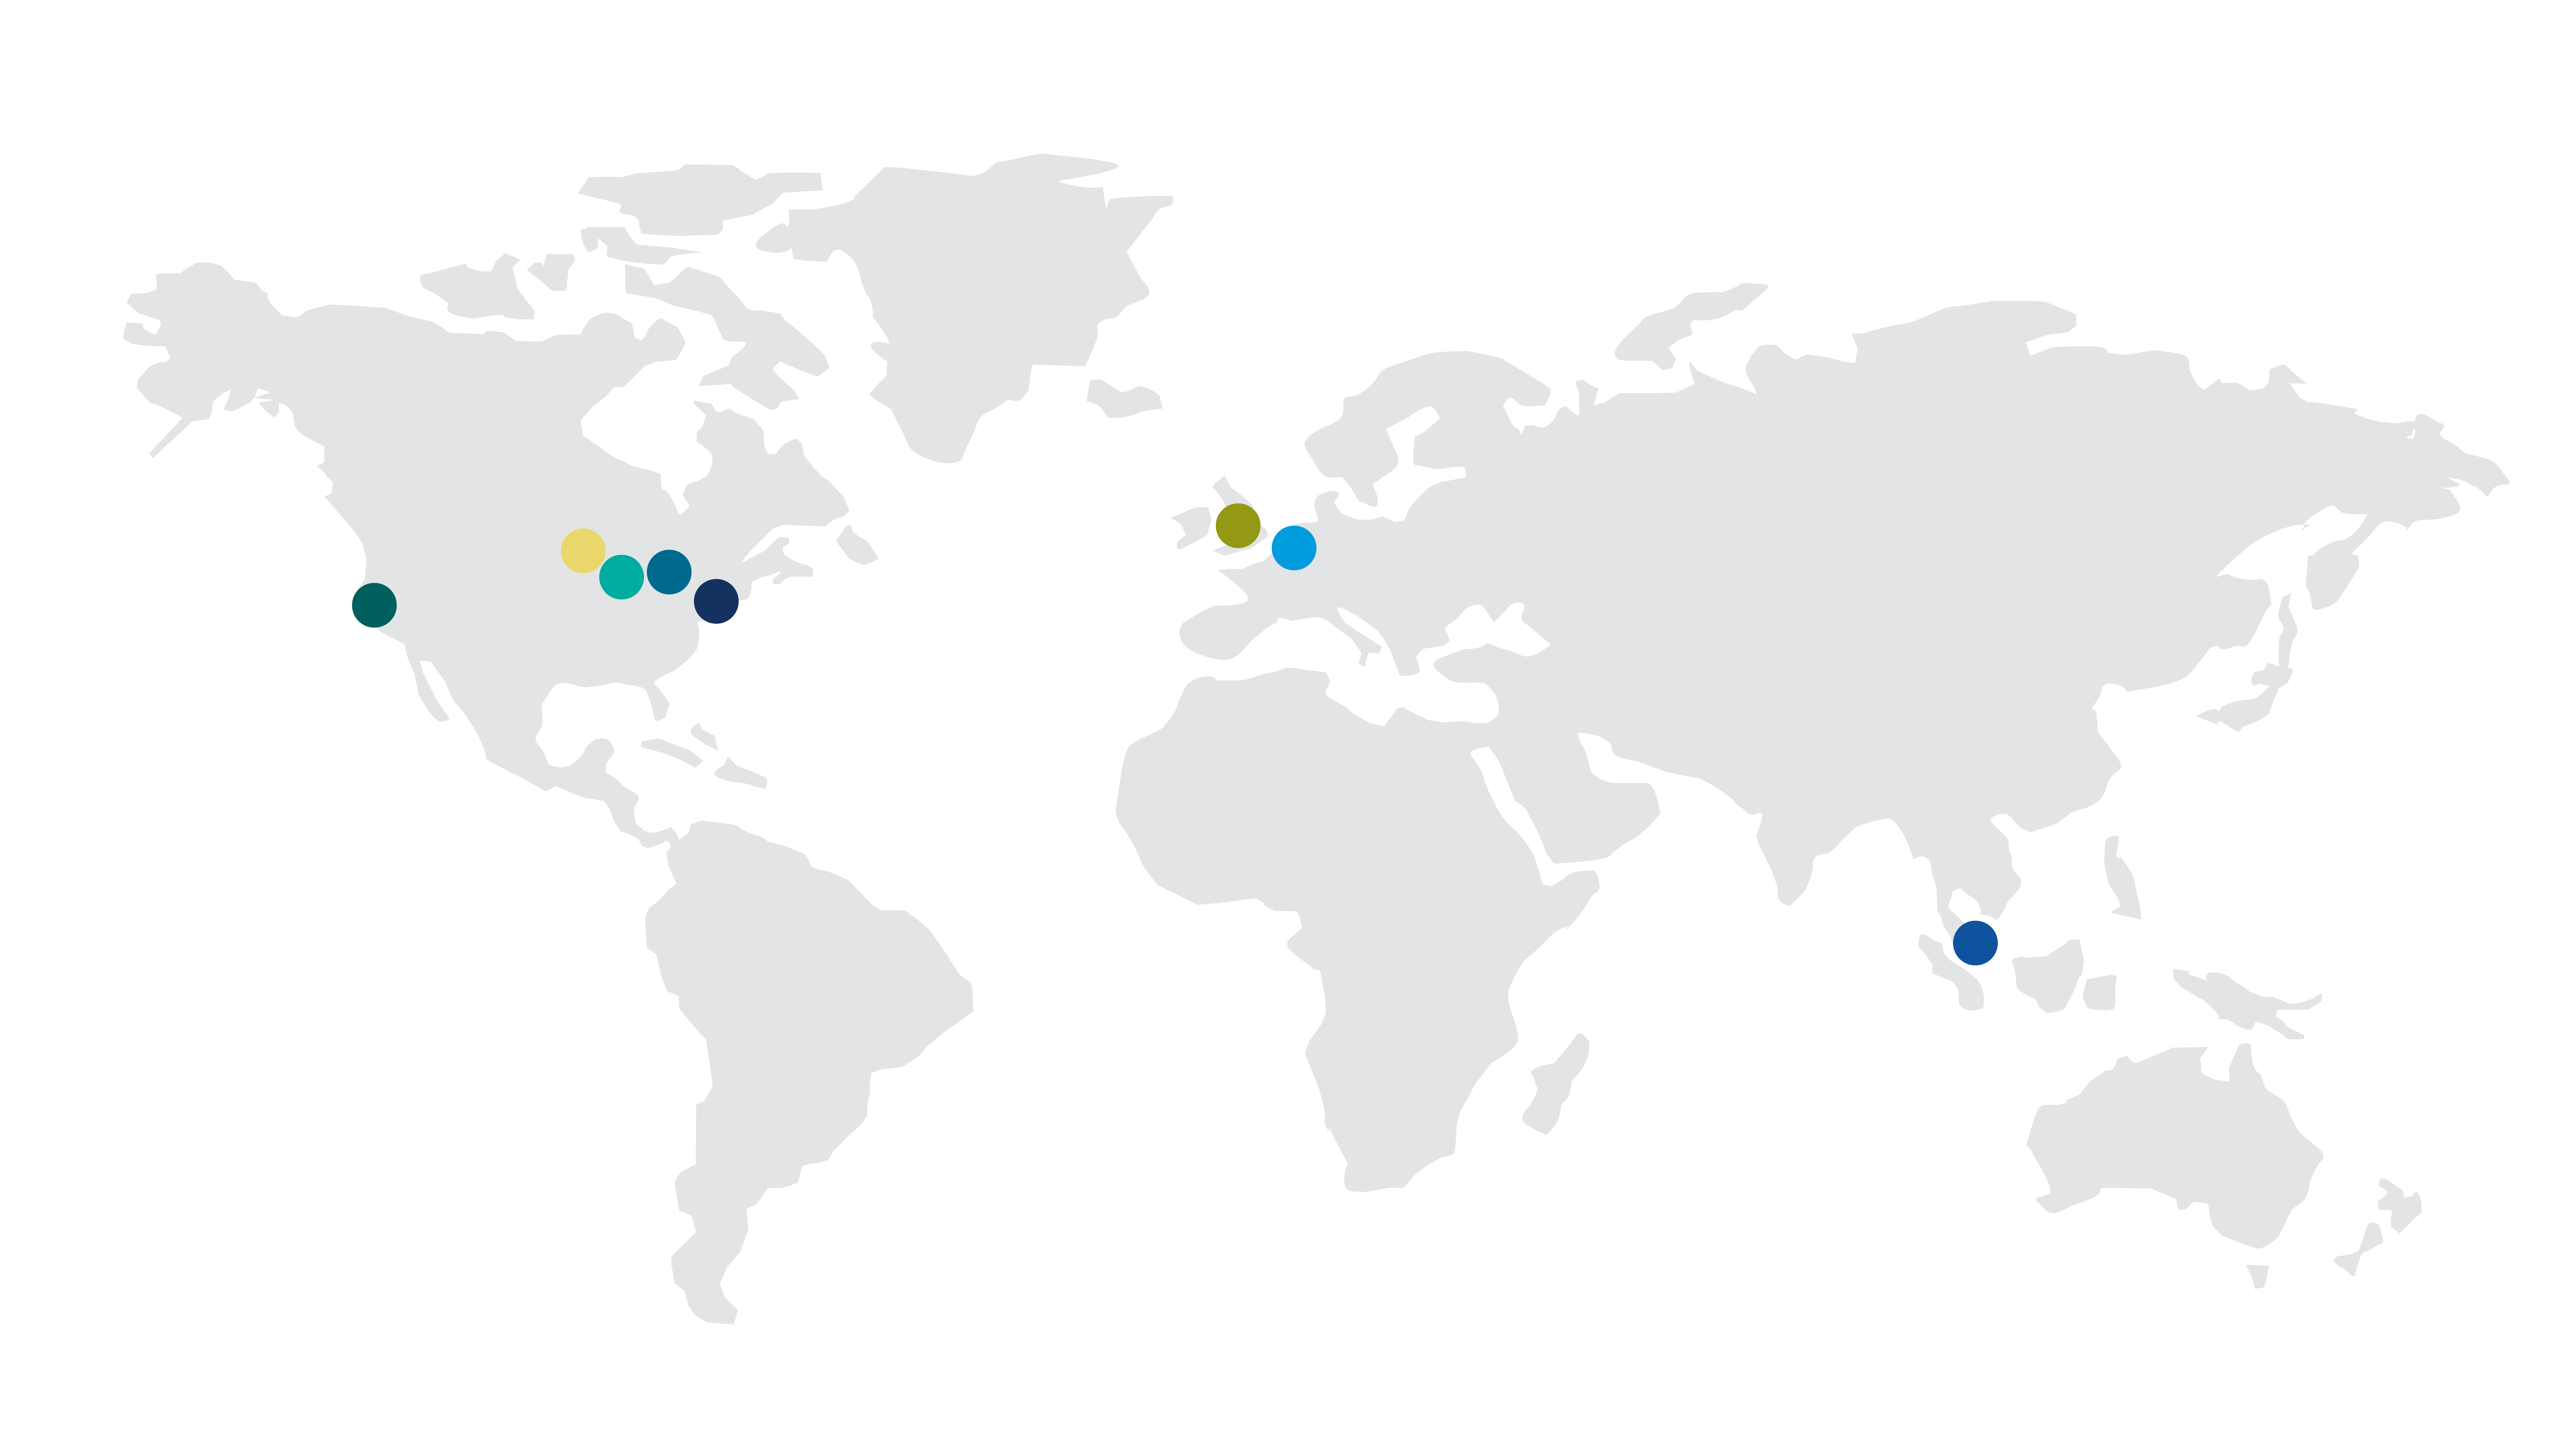 Serving Clients in 20 Countries Across 6 Continents